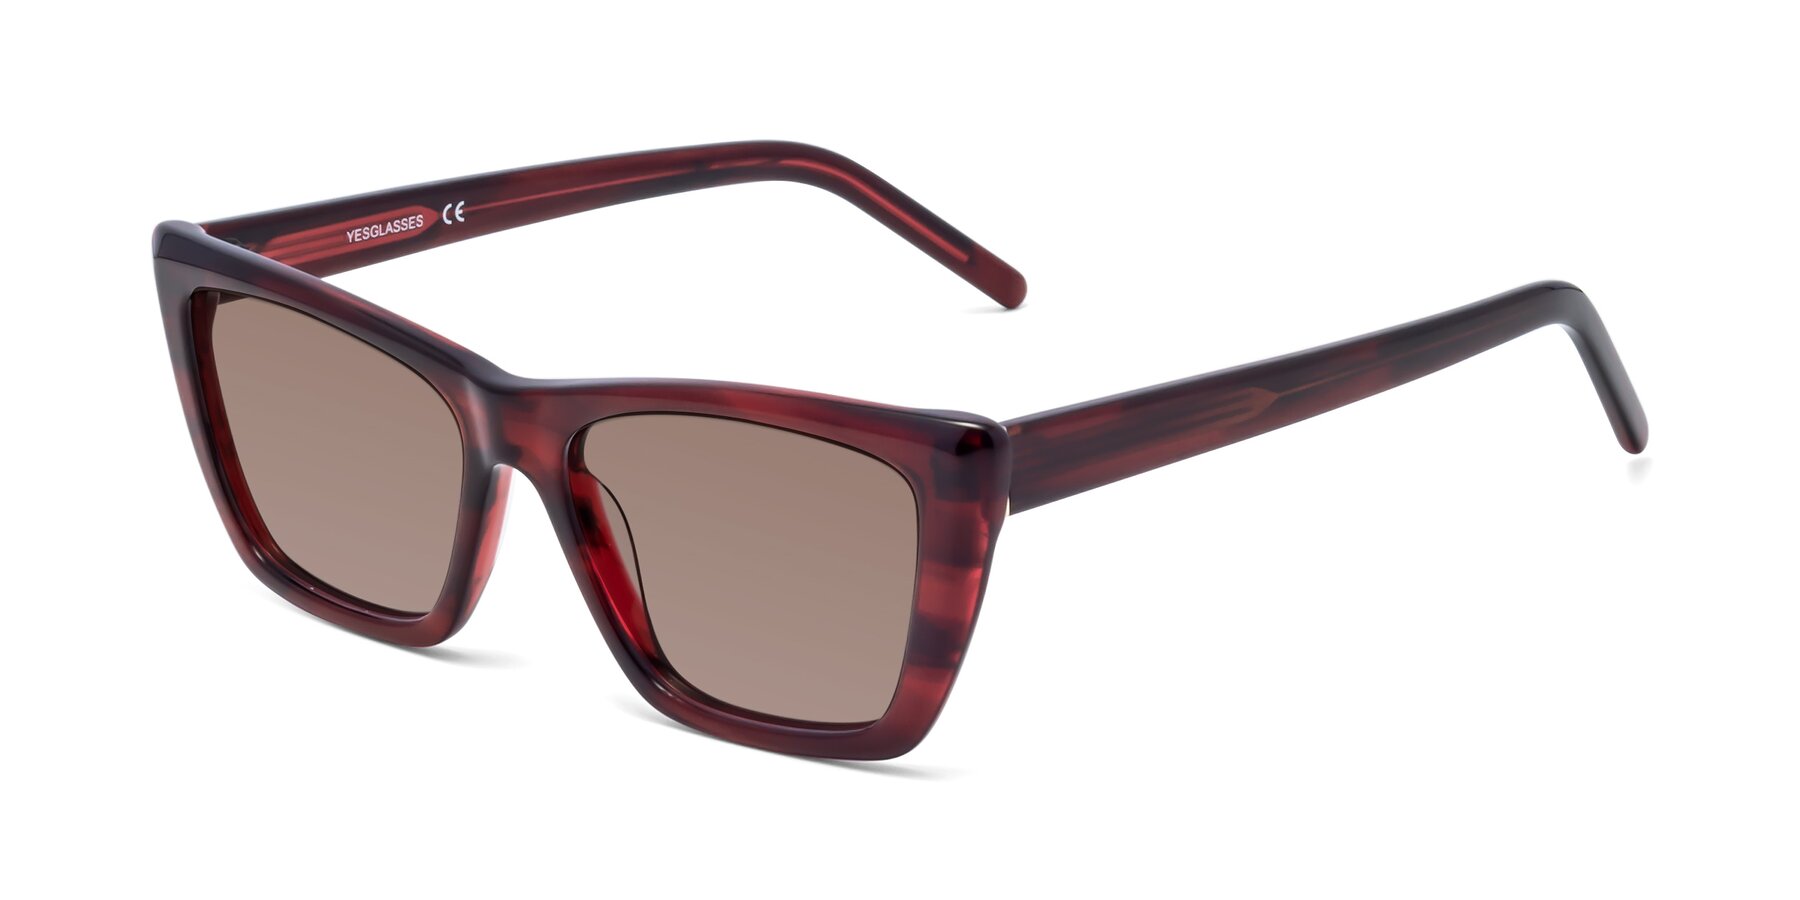 Angle of 1494 in Stripe Wine with Medium Brown Tinted Lenses